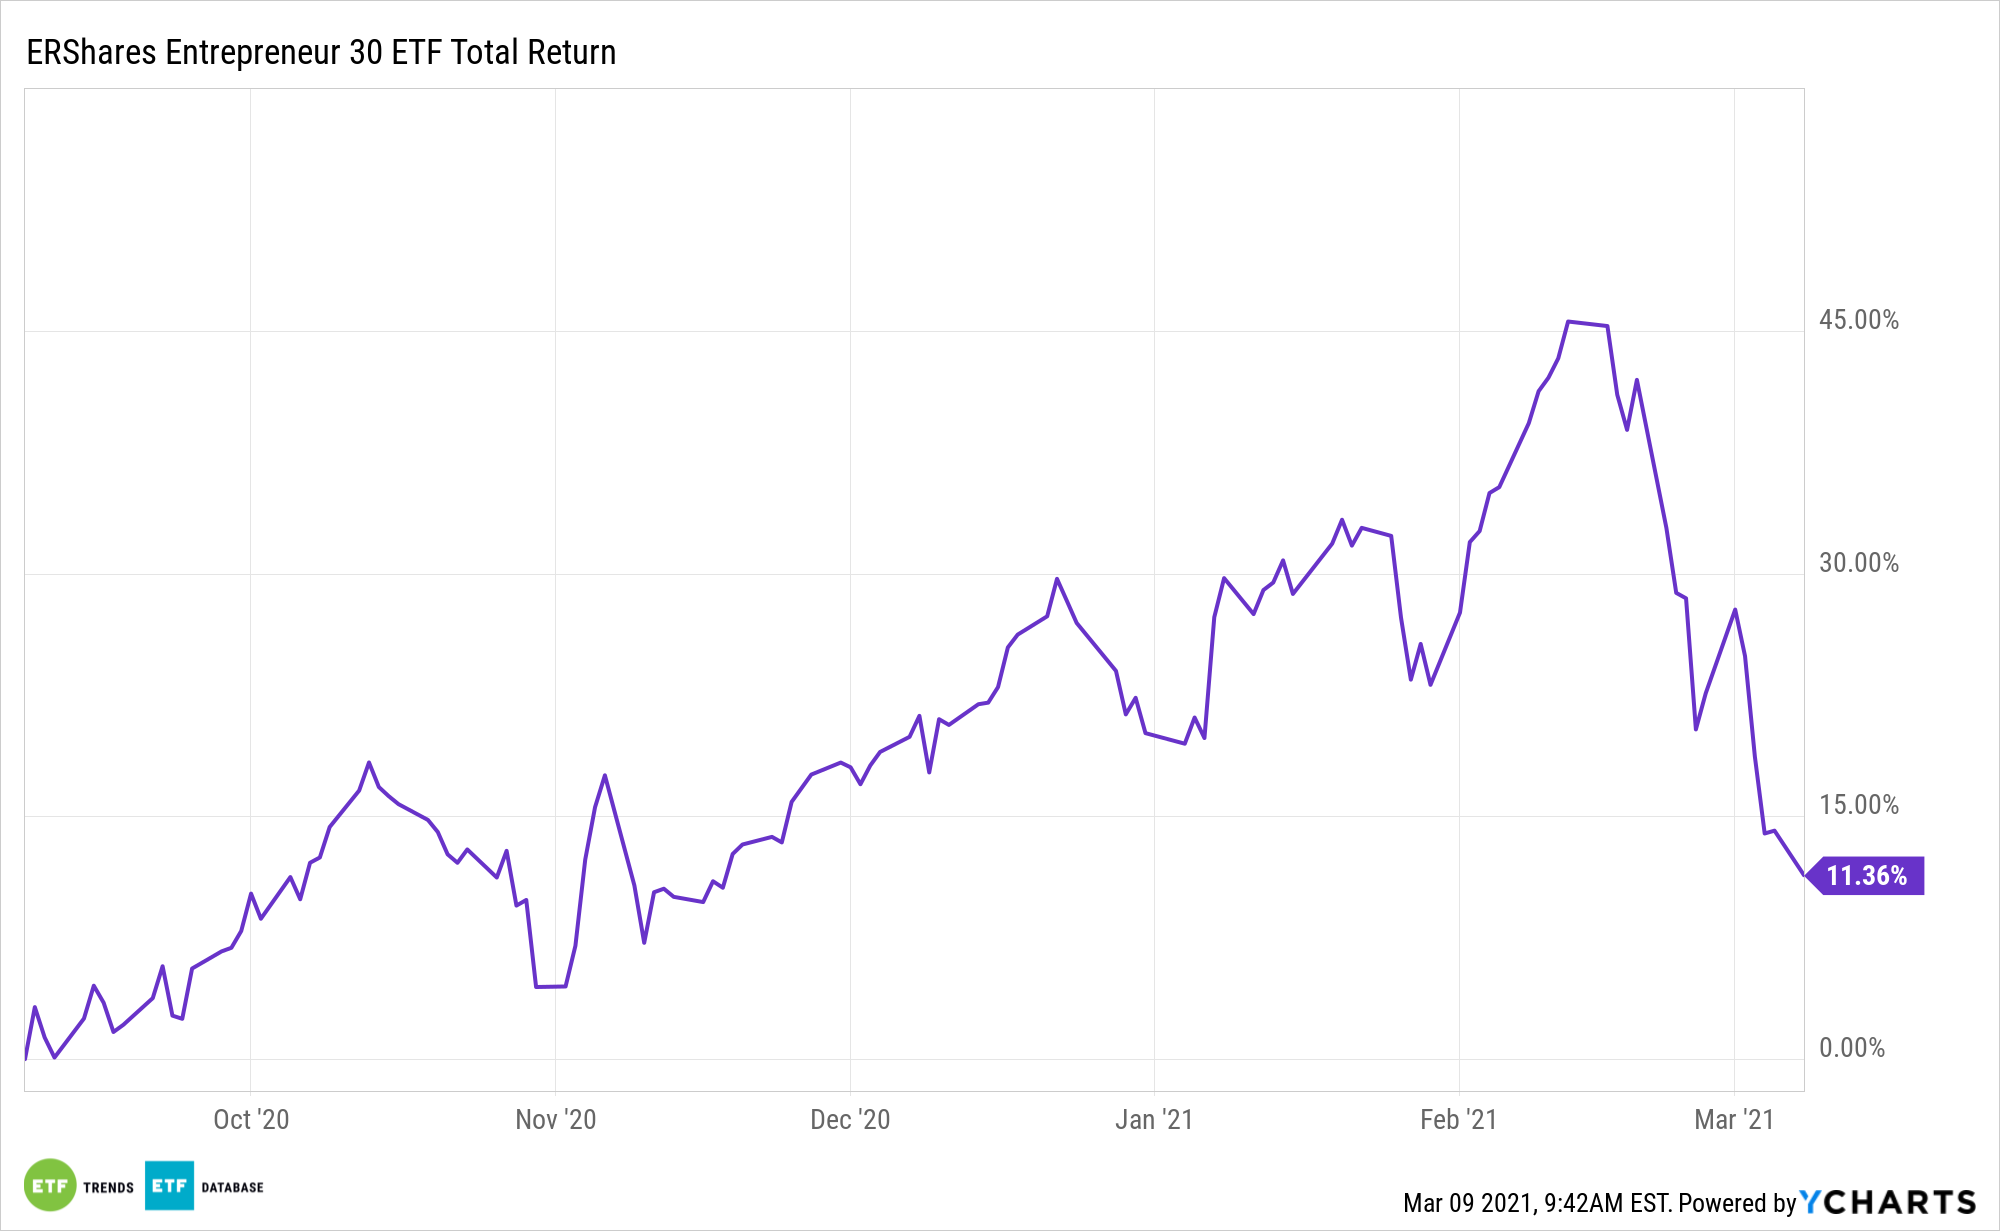 ENTR 6 Month Total Performance